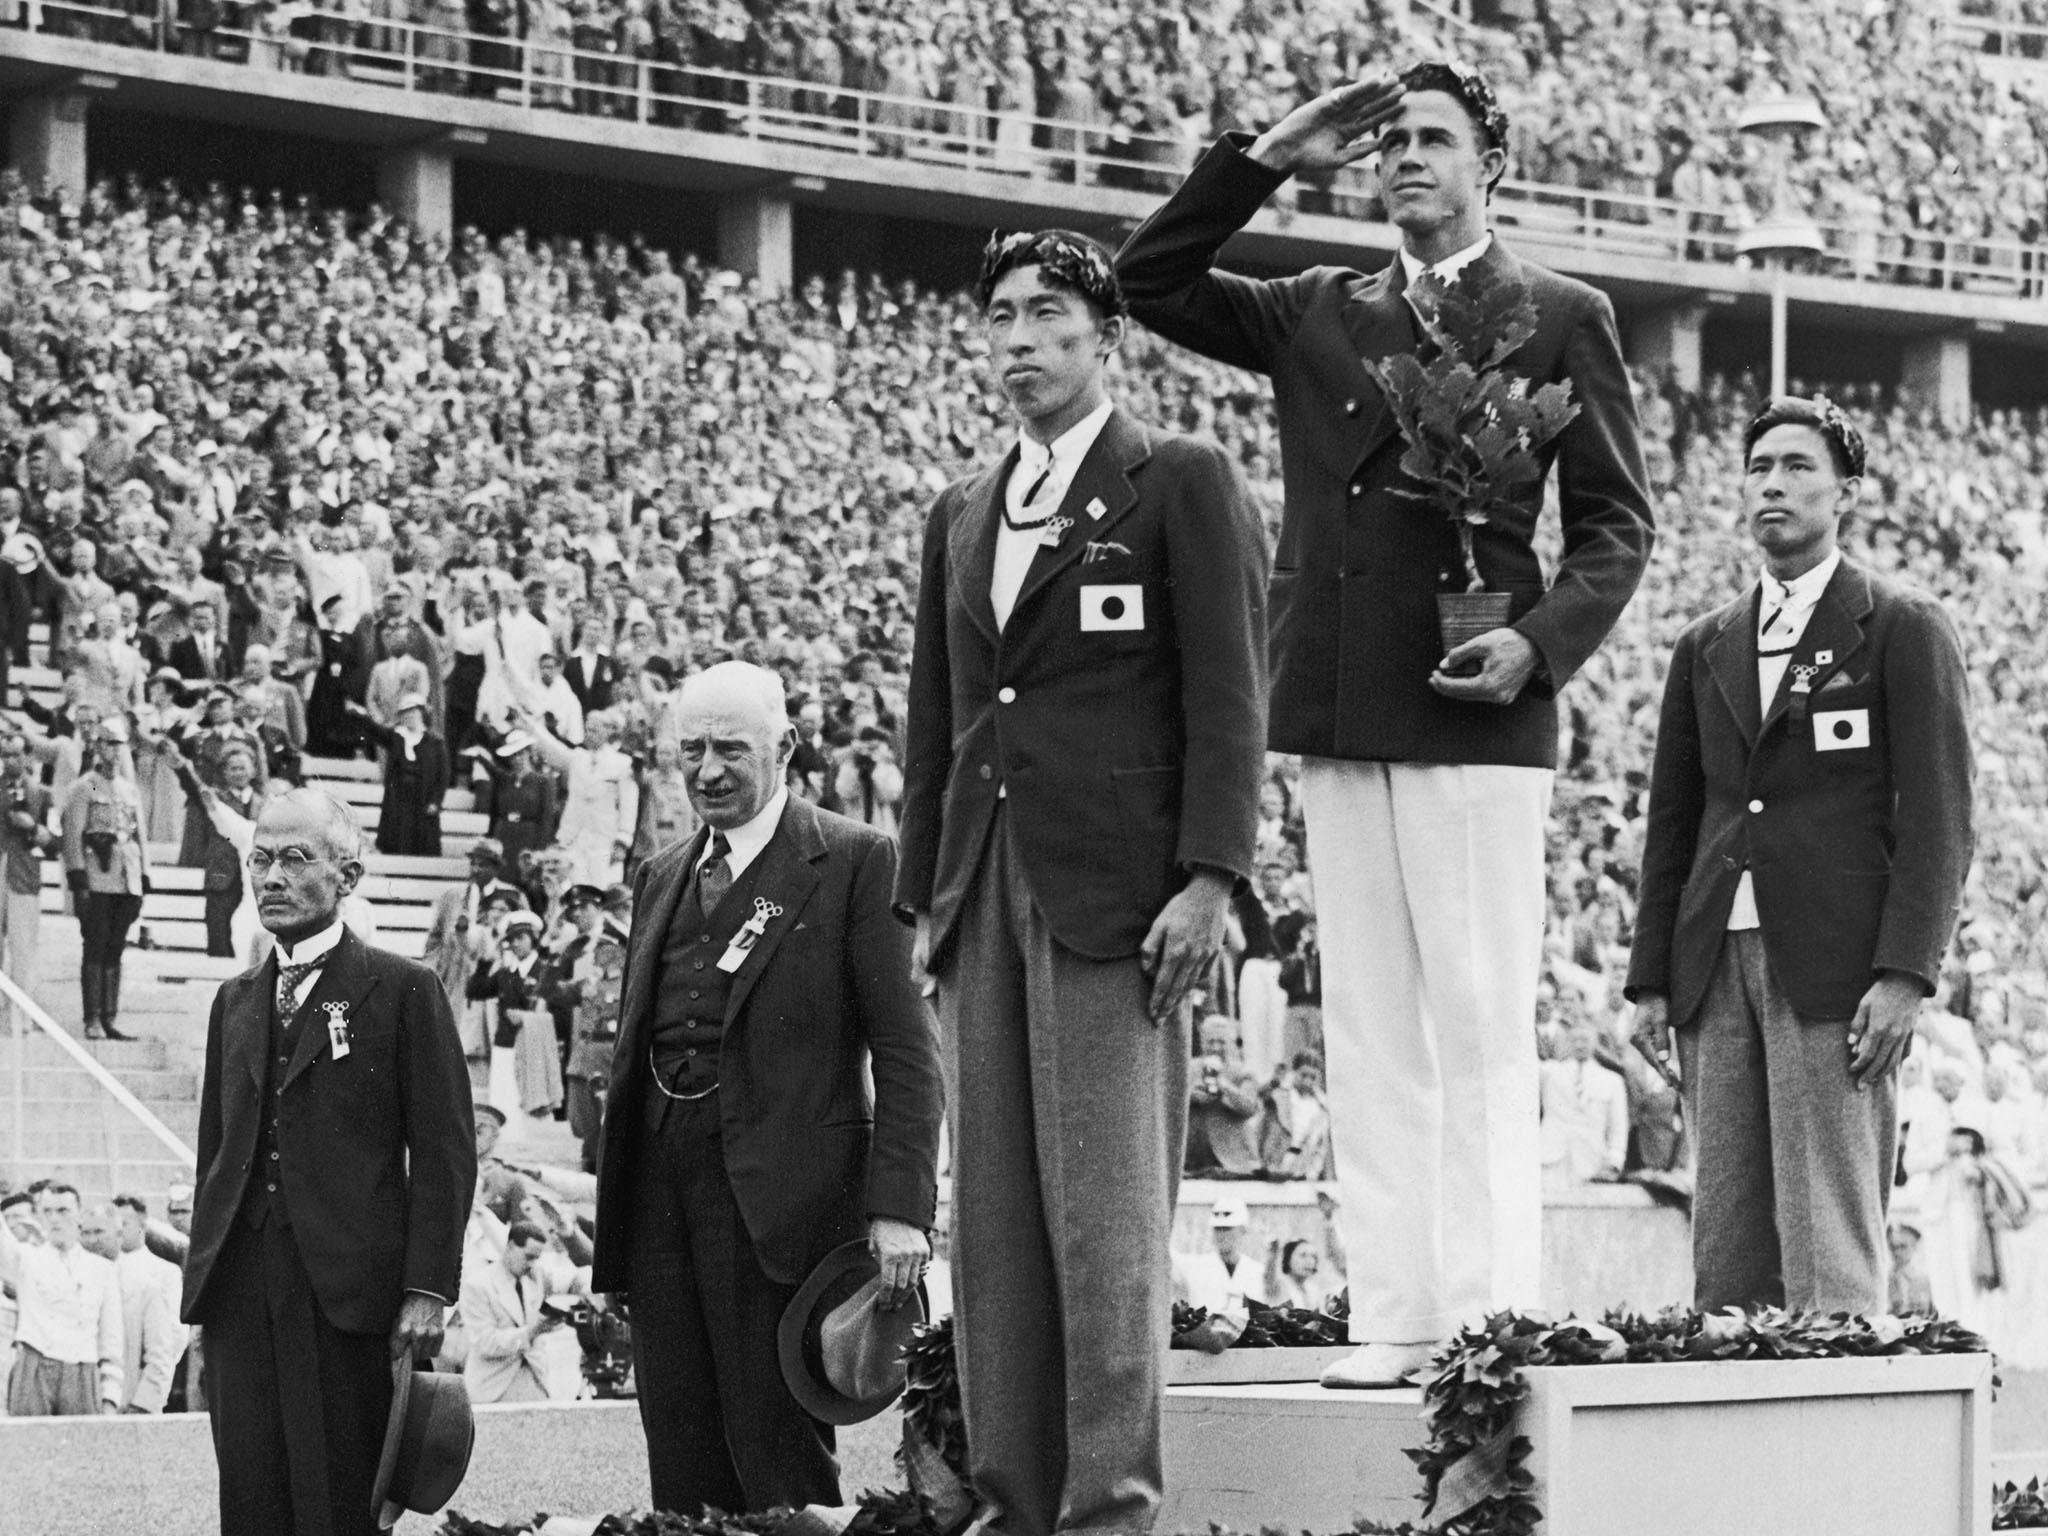 image for Great Olympic Friendships: Shuhei Nishida and Sueo Oe, the friends who wouldn’t be divided by their medals